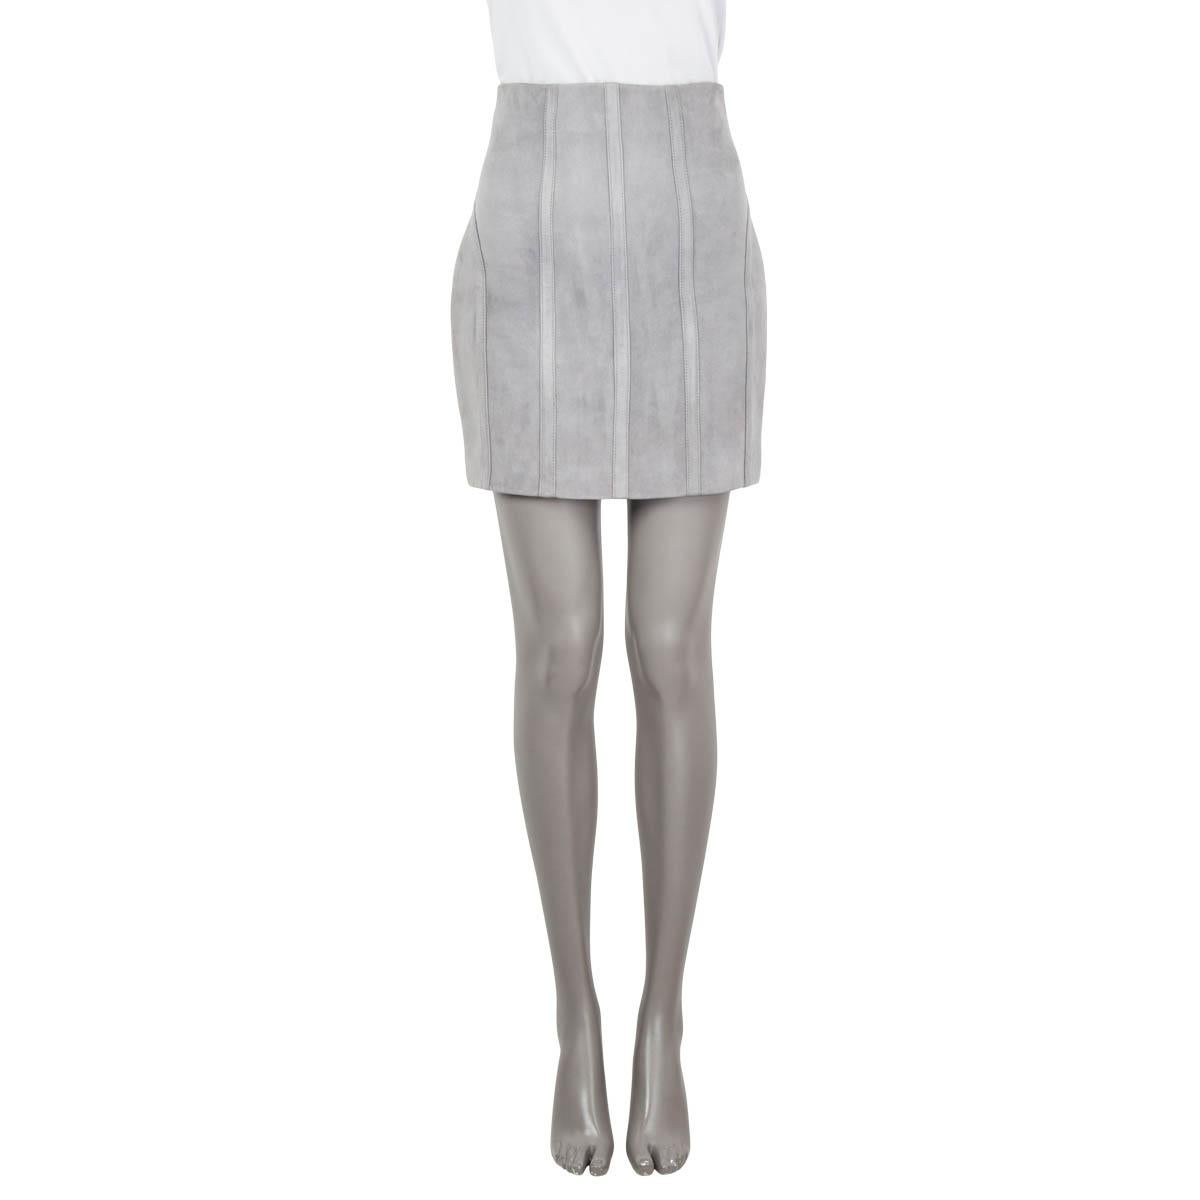 100% authentic Balmain vertical seams mini skirt in gray suede leather (100%). Opens with a golden zipper at the back. Lined in black viscose (52%) and cotton (48%). Has been worn and is in excellent condition.

Fall/winter 2016

Measurements
Tag